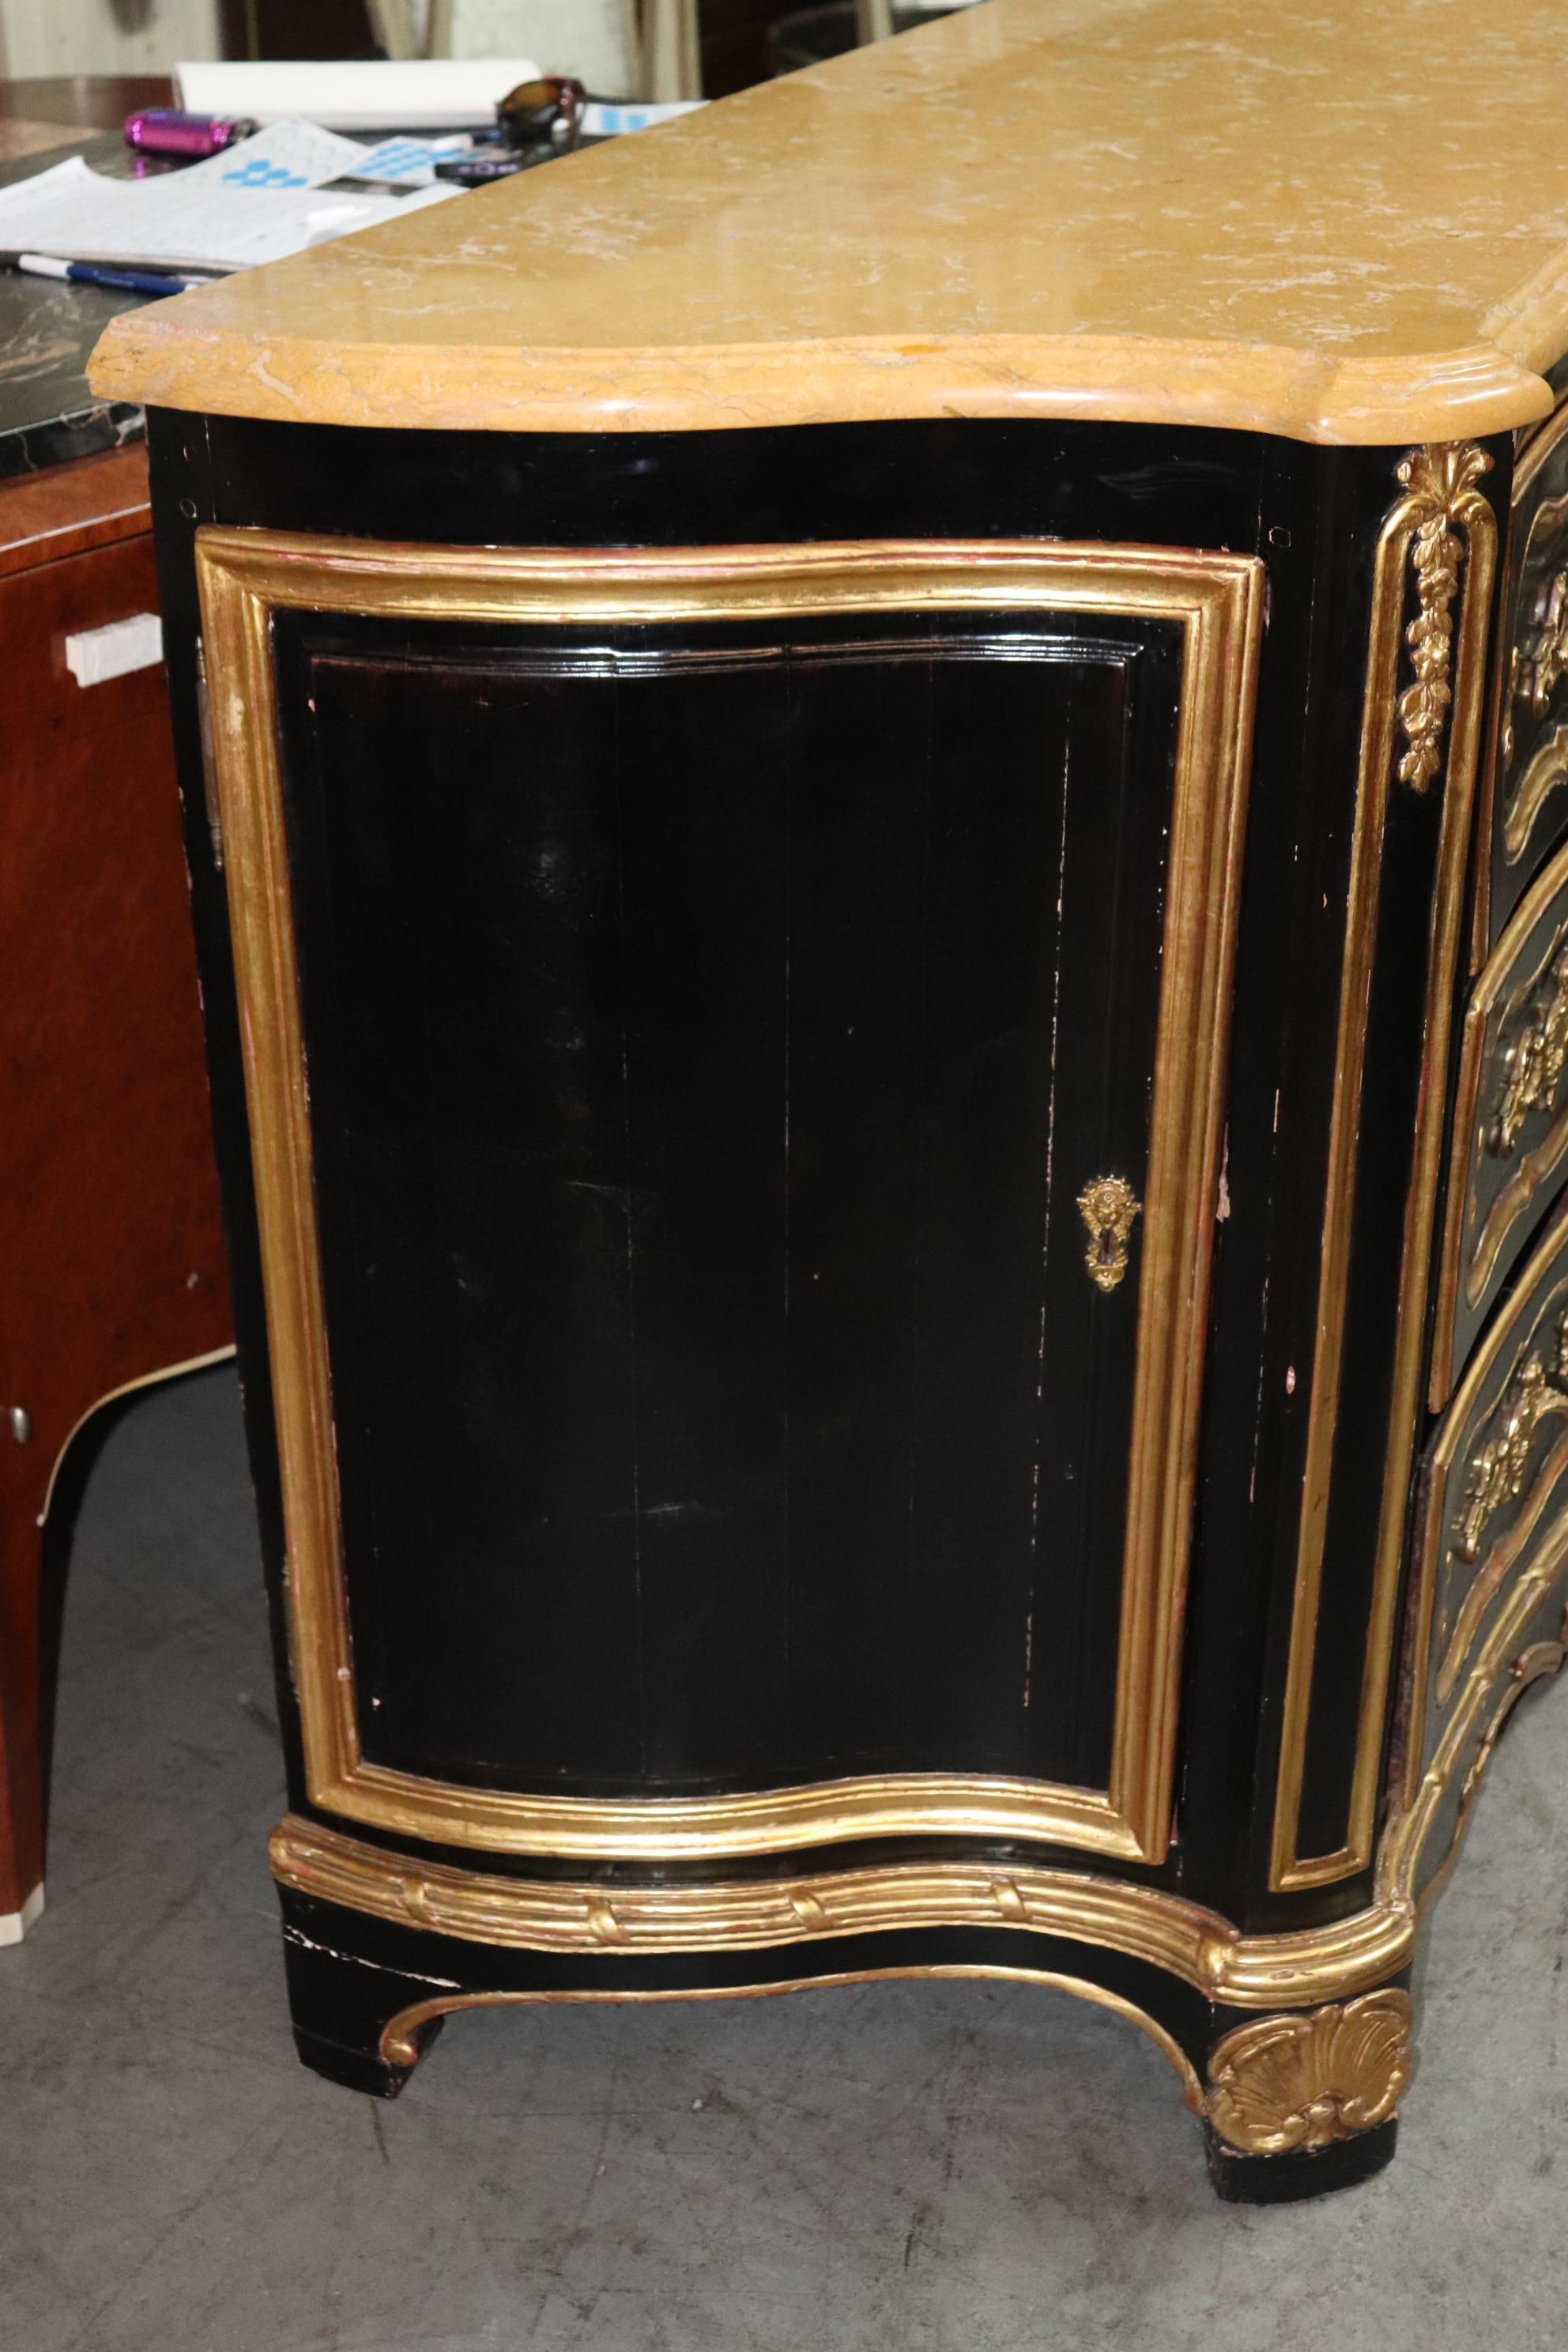 Huge Gilded Ebonized Period French Louis XV Marble Top Butlers Desk Commode For Sale 3